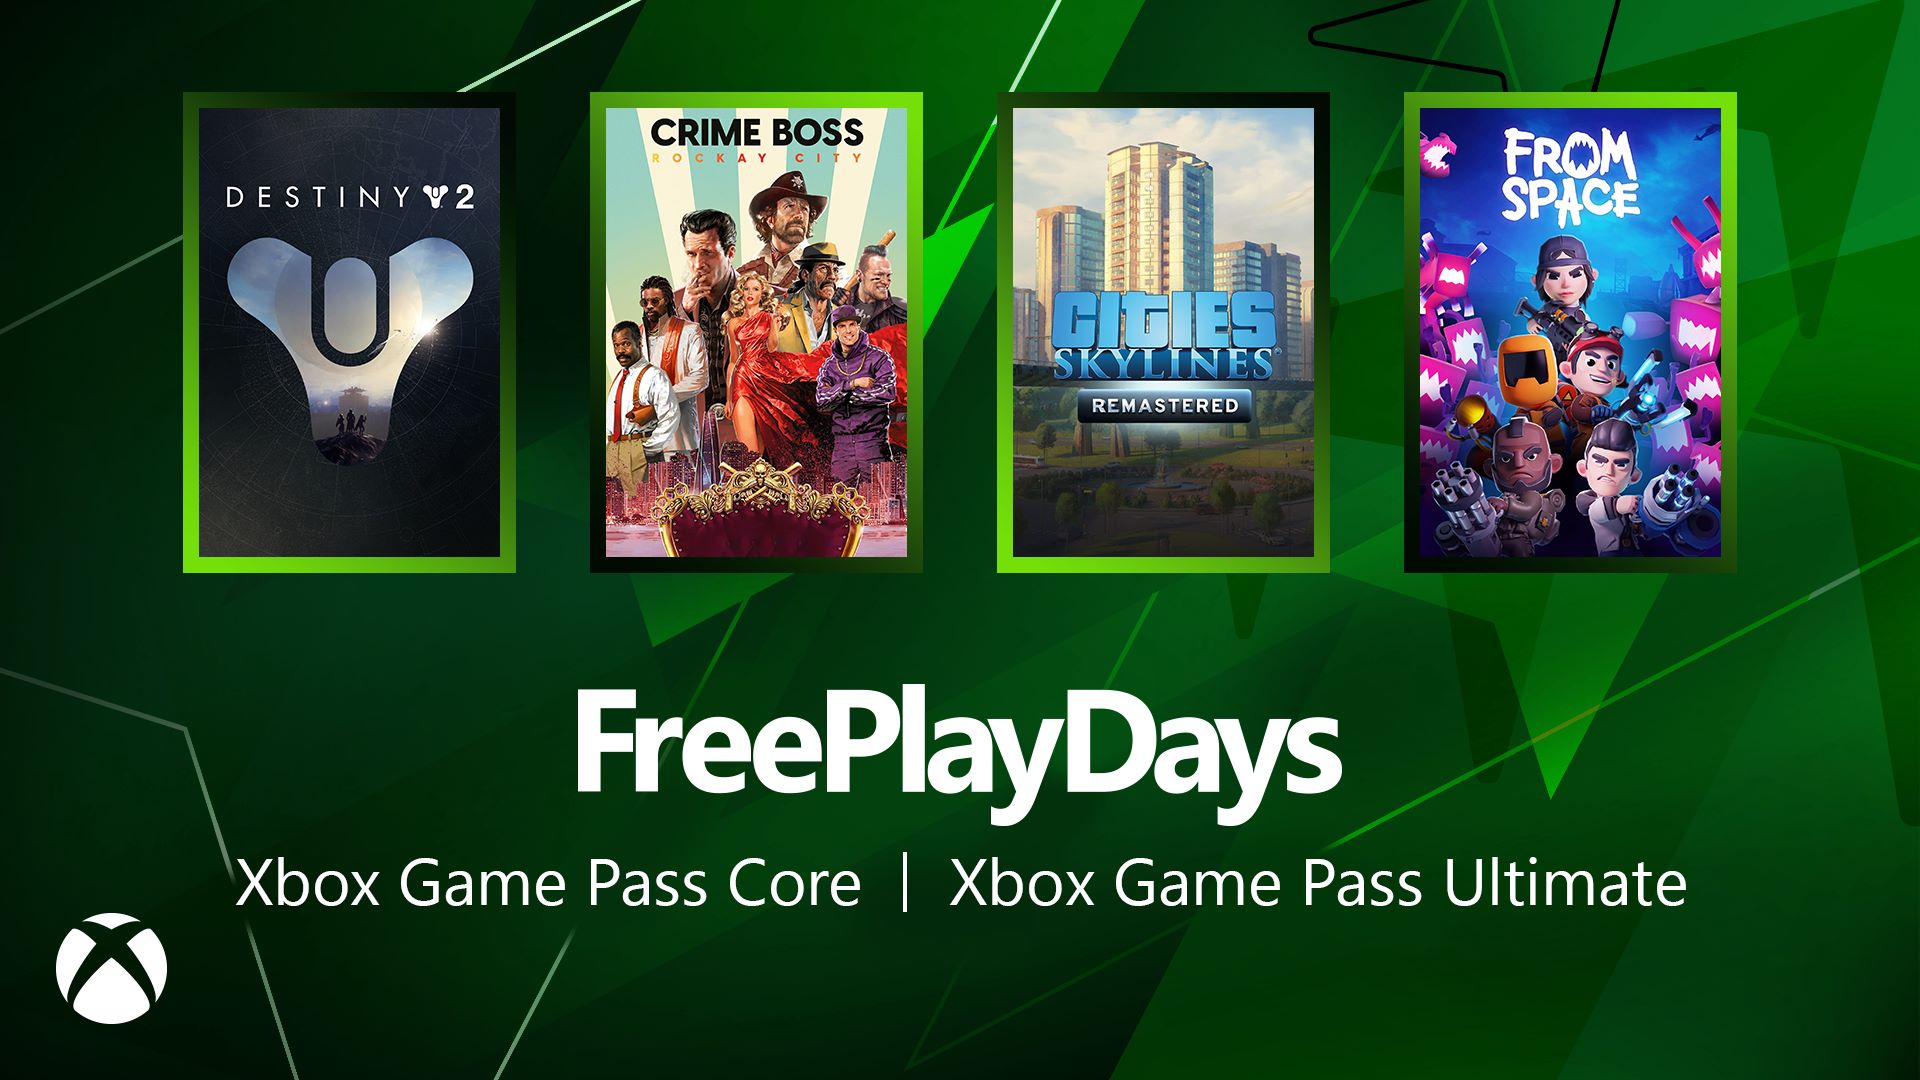 Free Play Days – 『Destiny 2』拡張コンテンツ、『Crime Boss: Rockay City』、『Cities Skylines – Remastered』、『From Space』